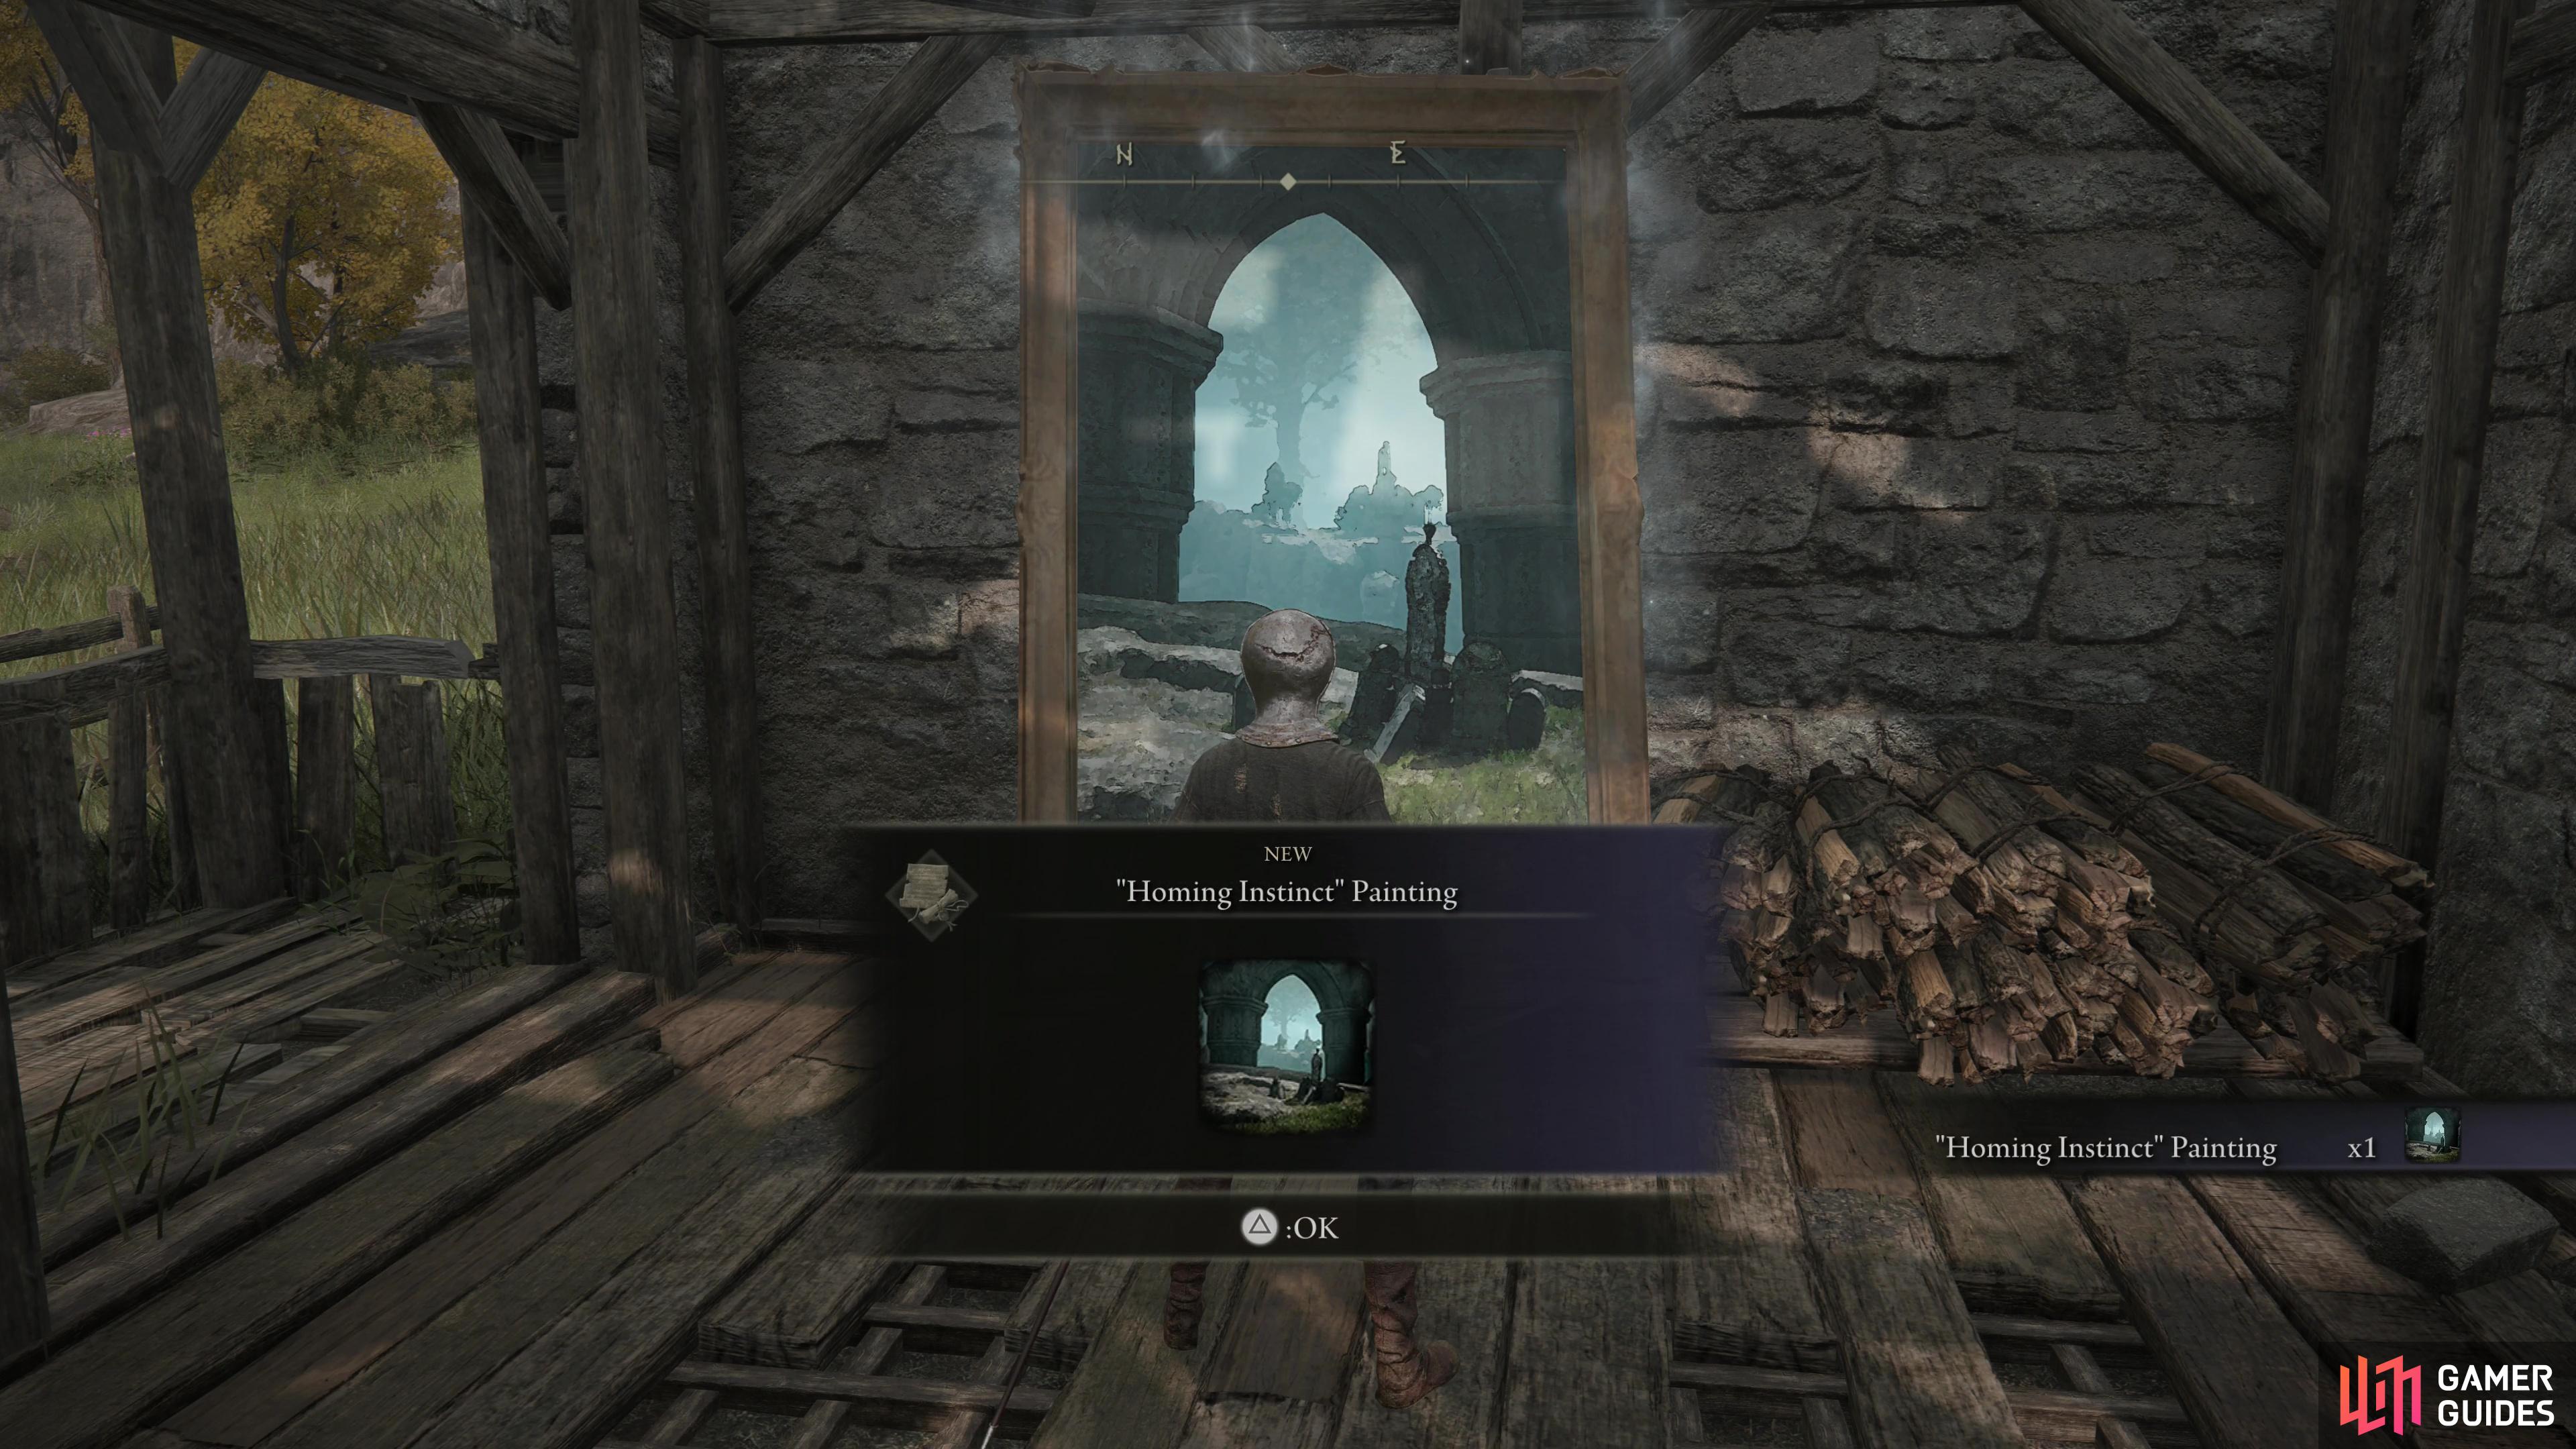 Search a painting in the Artist's Shack to acquire the Homing Instinct Painting.